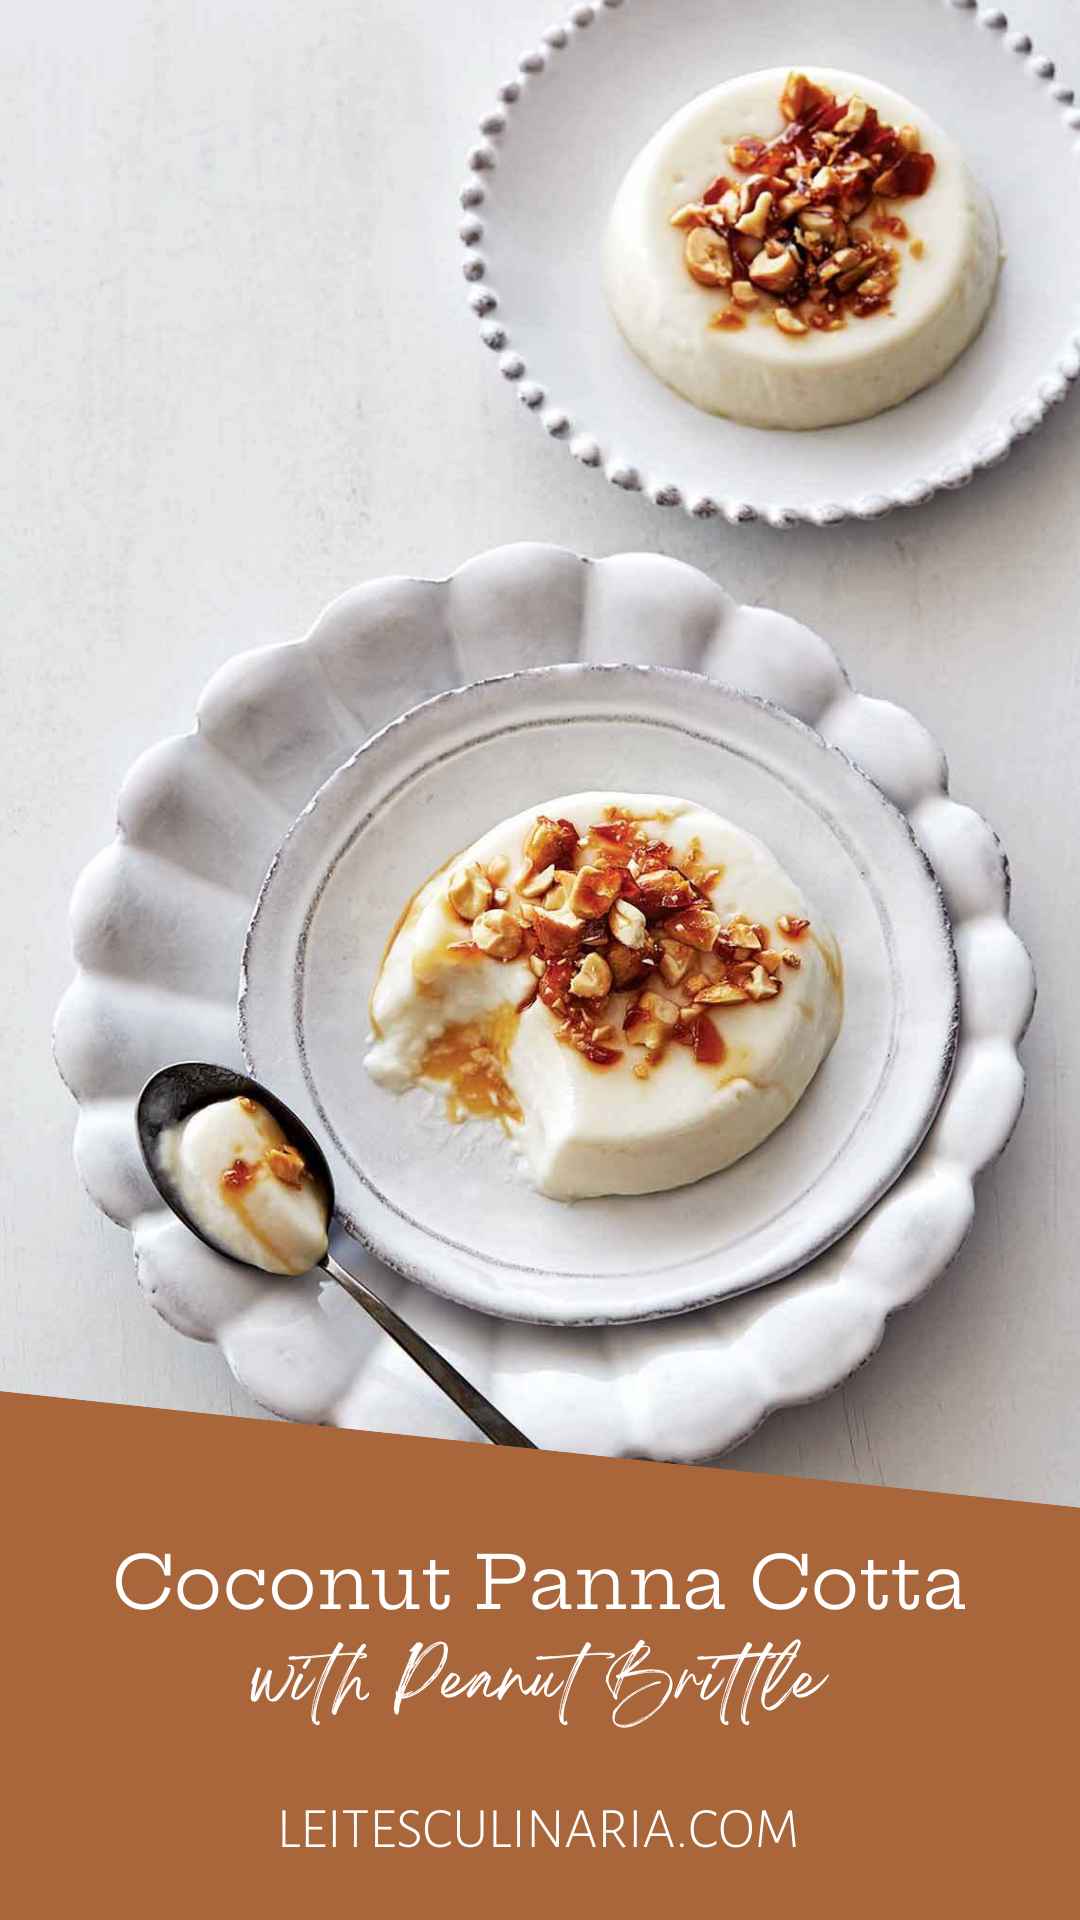 Two servings of coconut panna cotta topped with peanut brittle on decorative white plates.